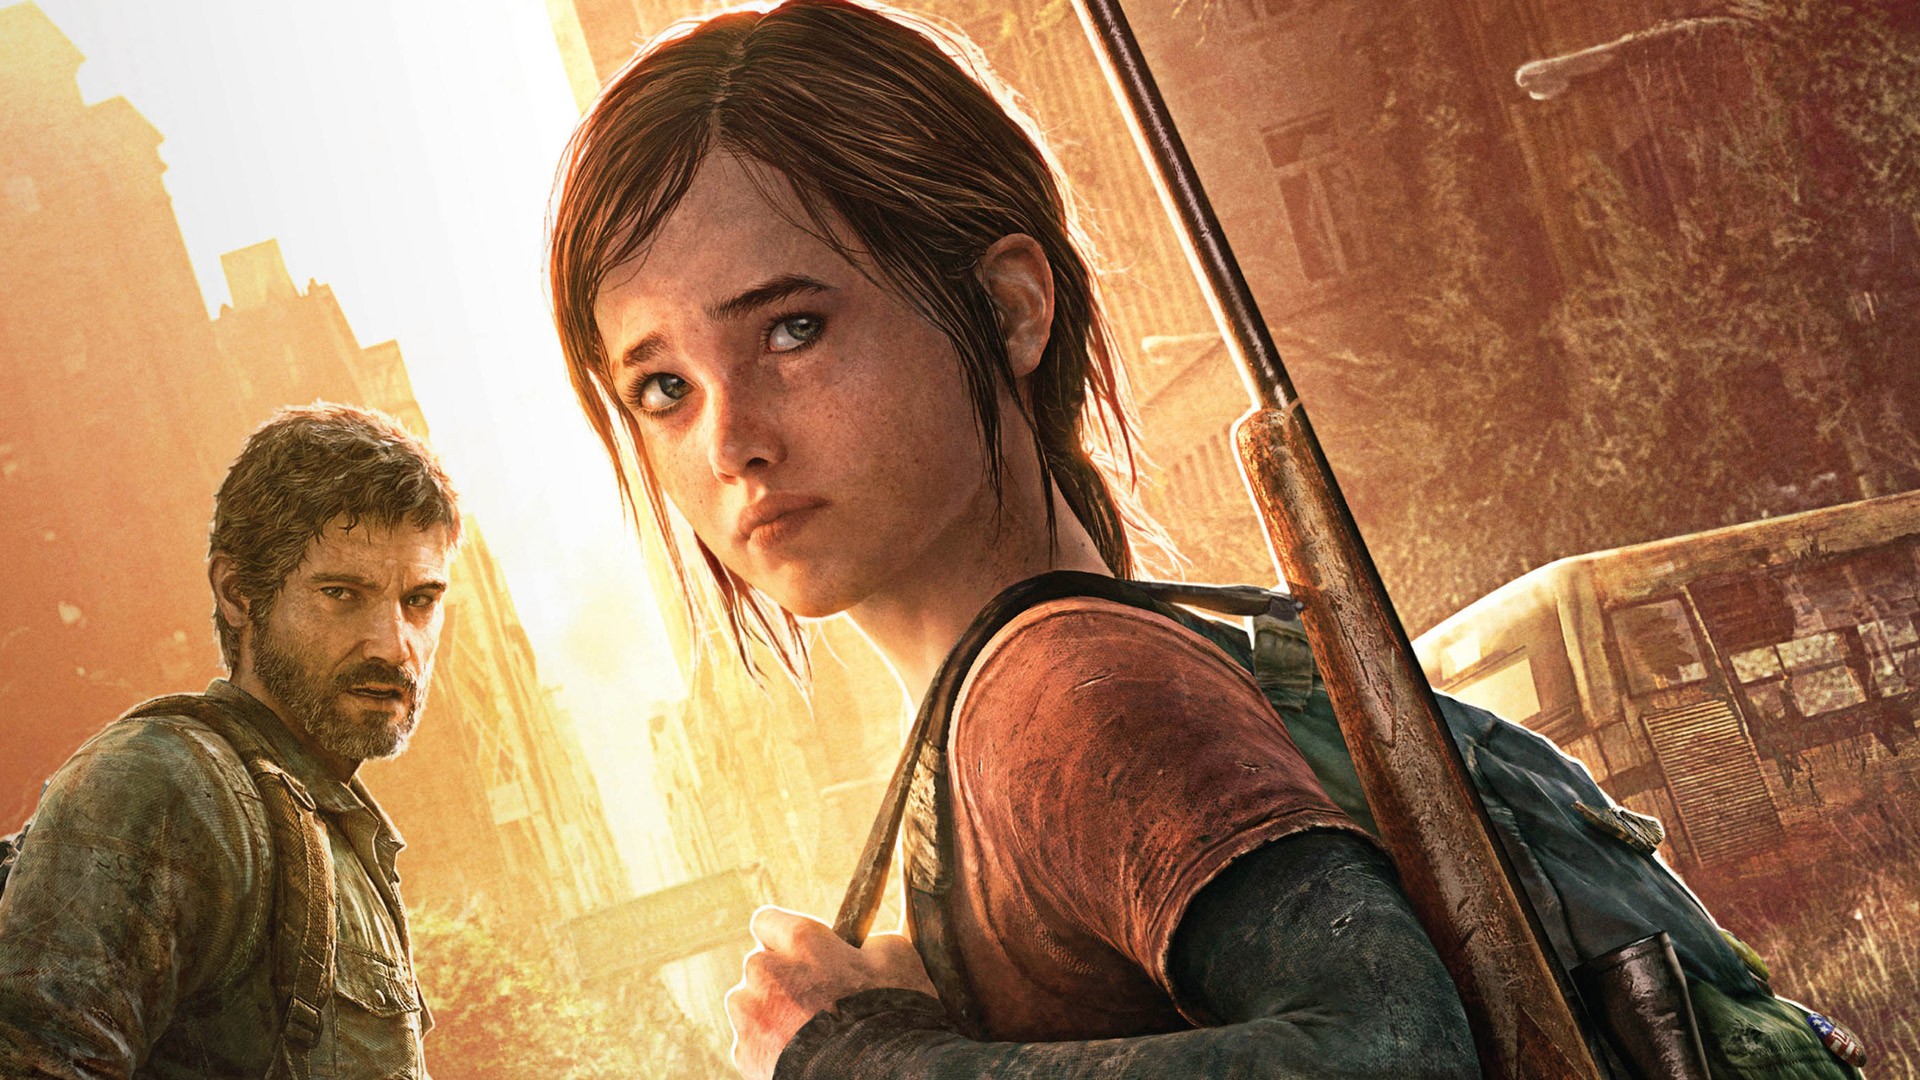 Sony has unveiled an early remake of The Last of Us - for PS5 and PC